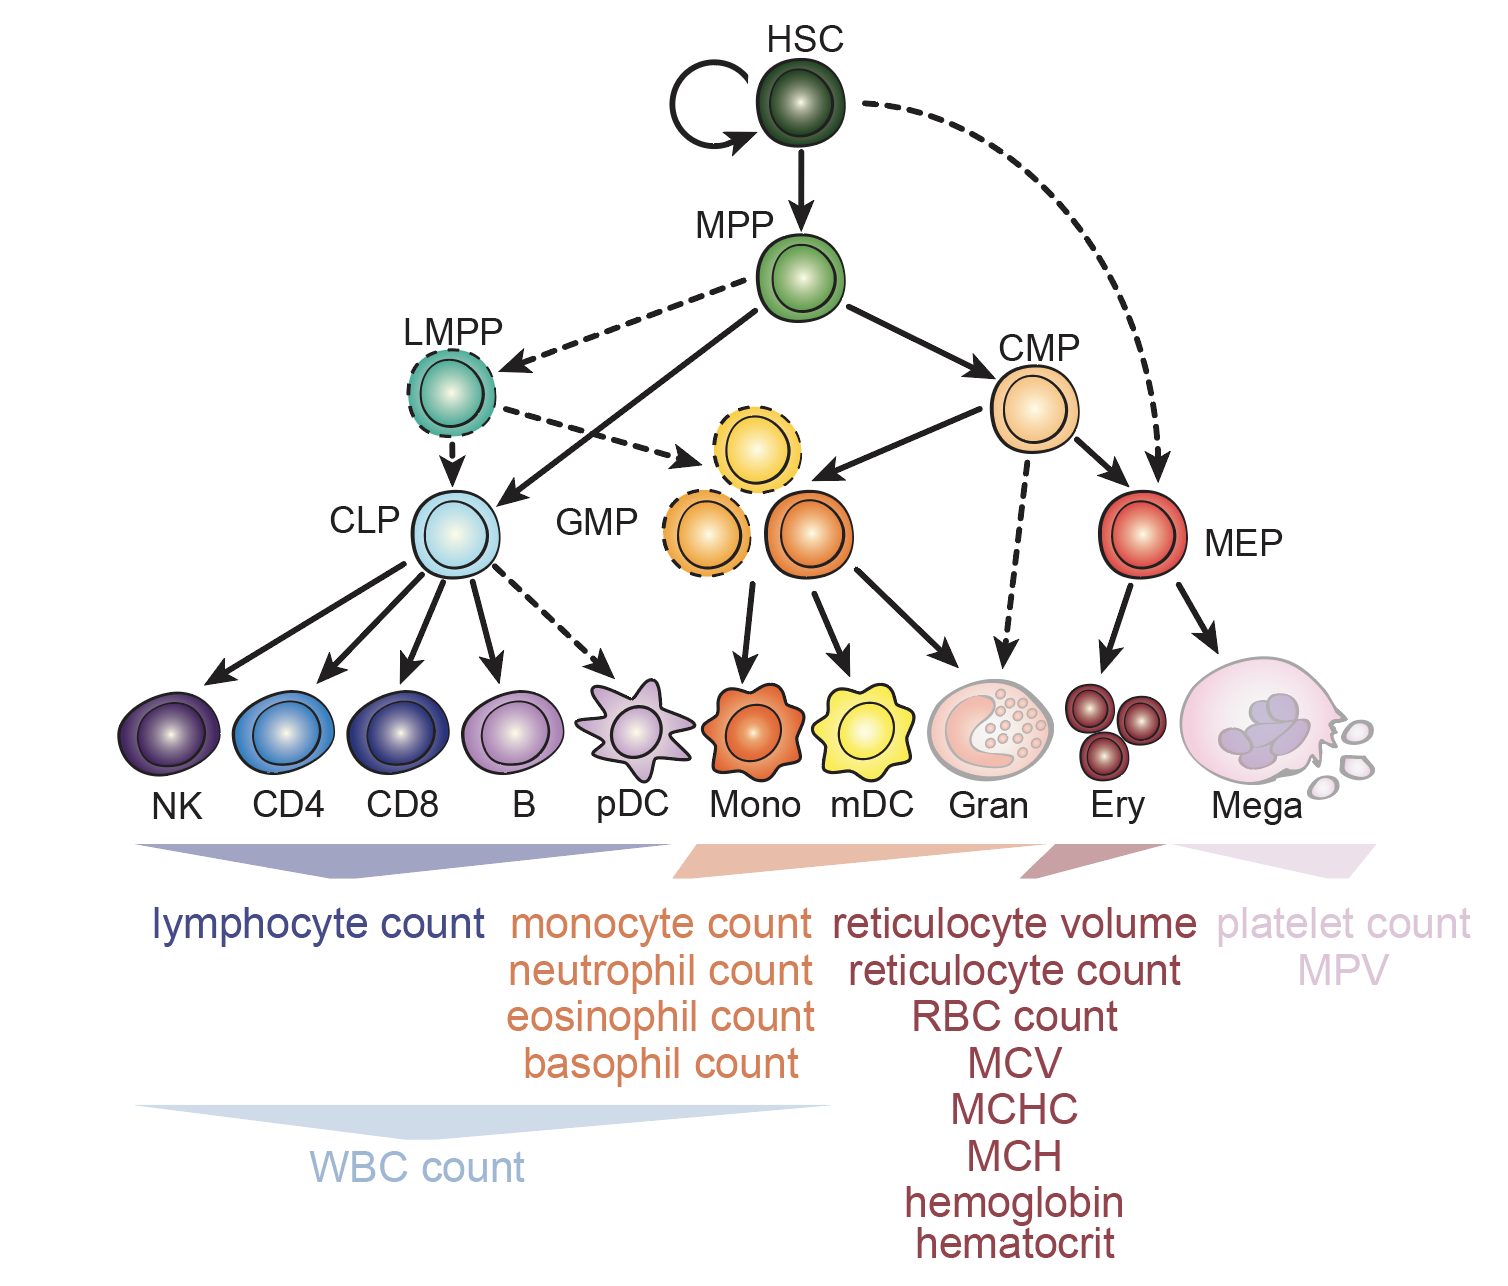 Interrogation of human hematopoiesis at single-cell and single-variant resolution